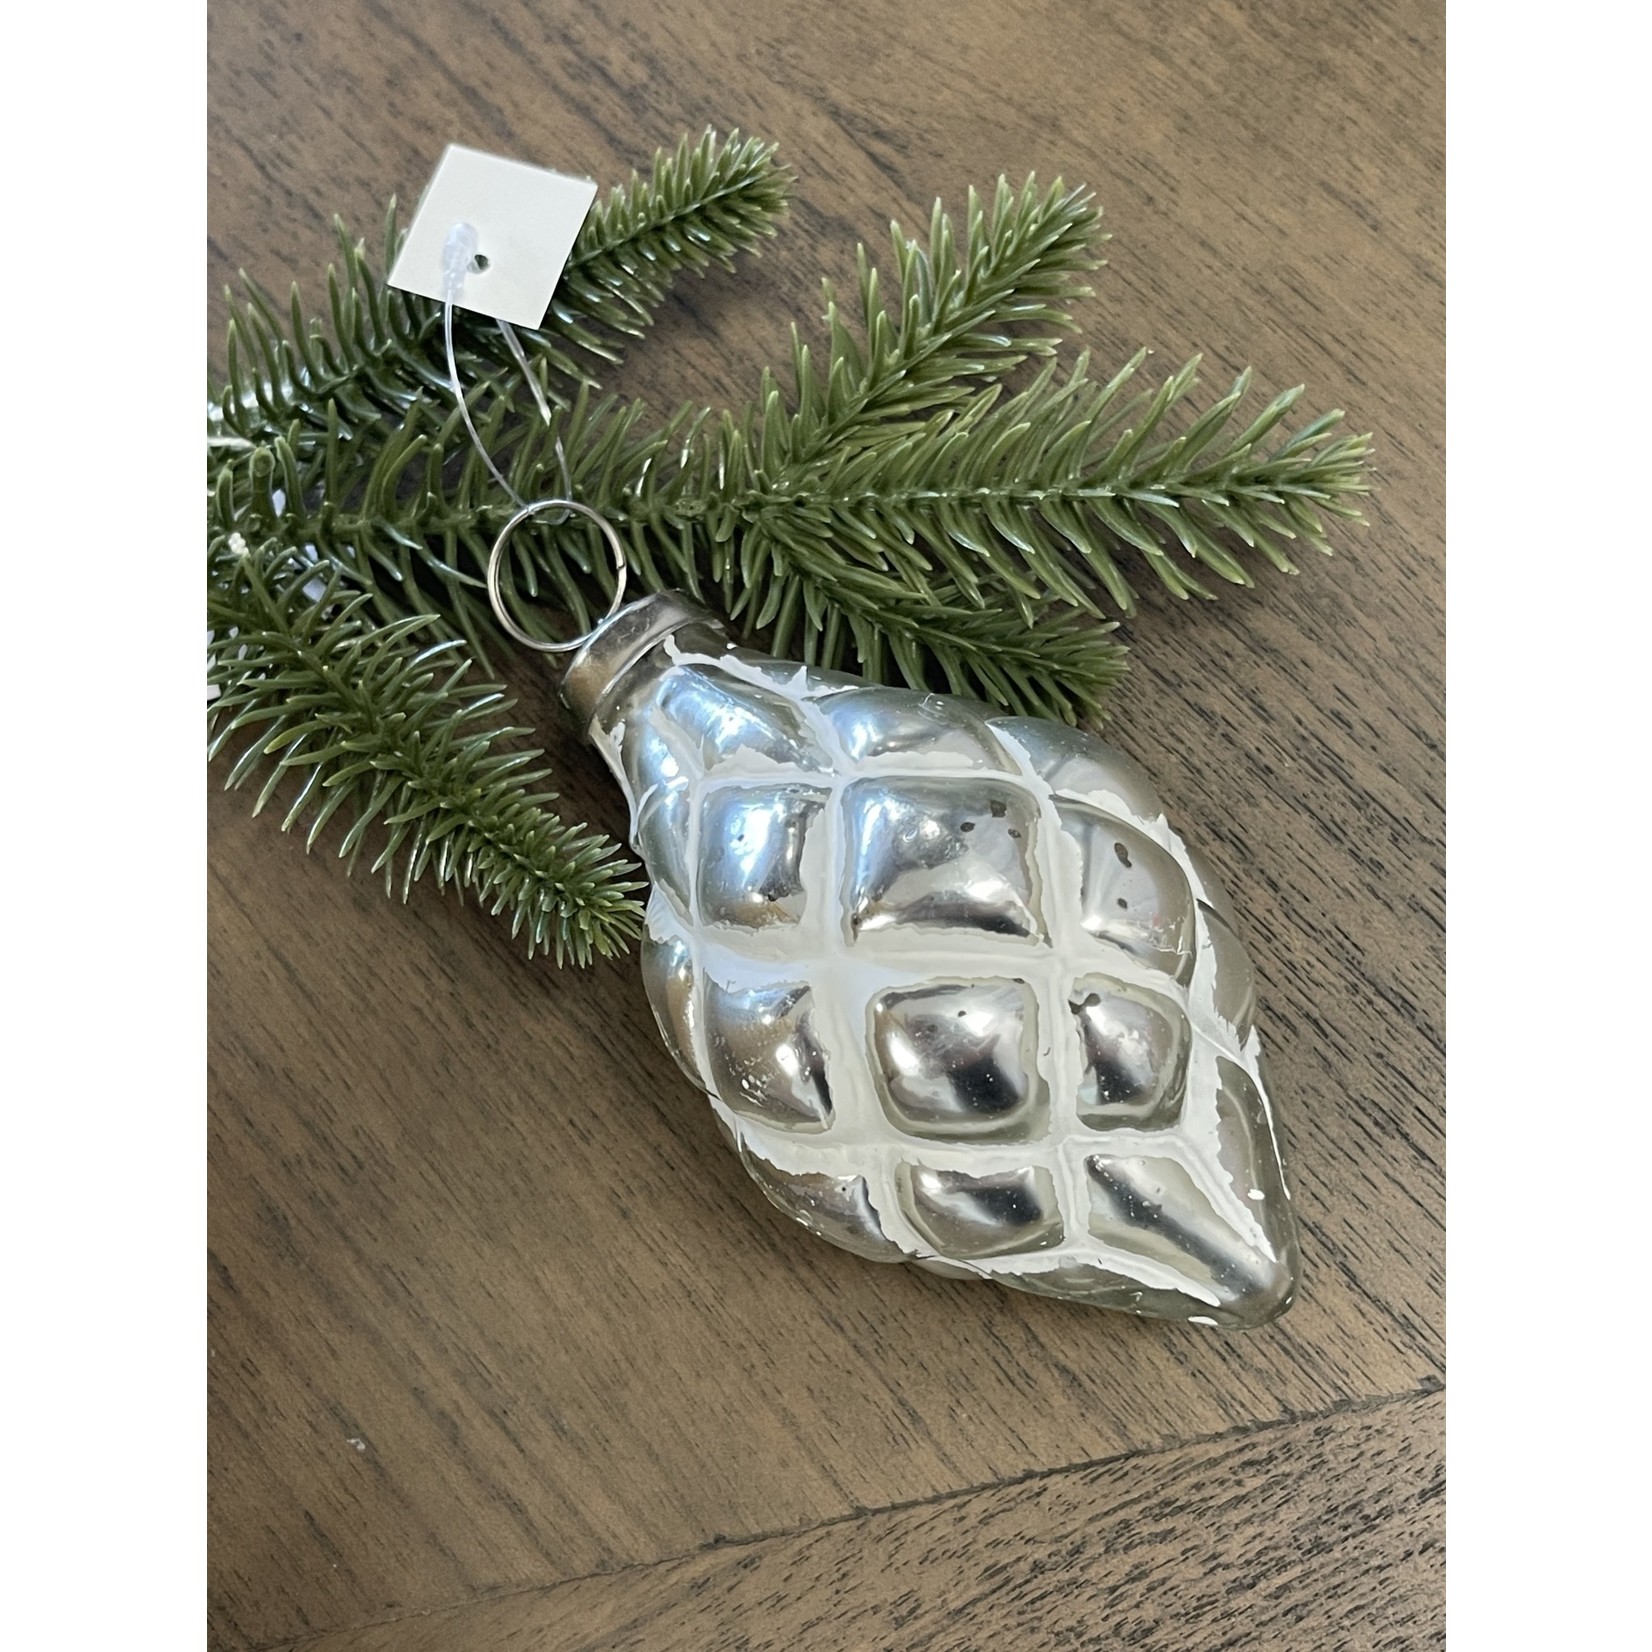 Cottage White Finial Glass Ornament